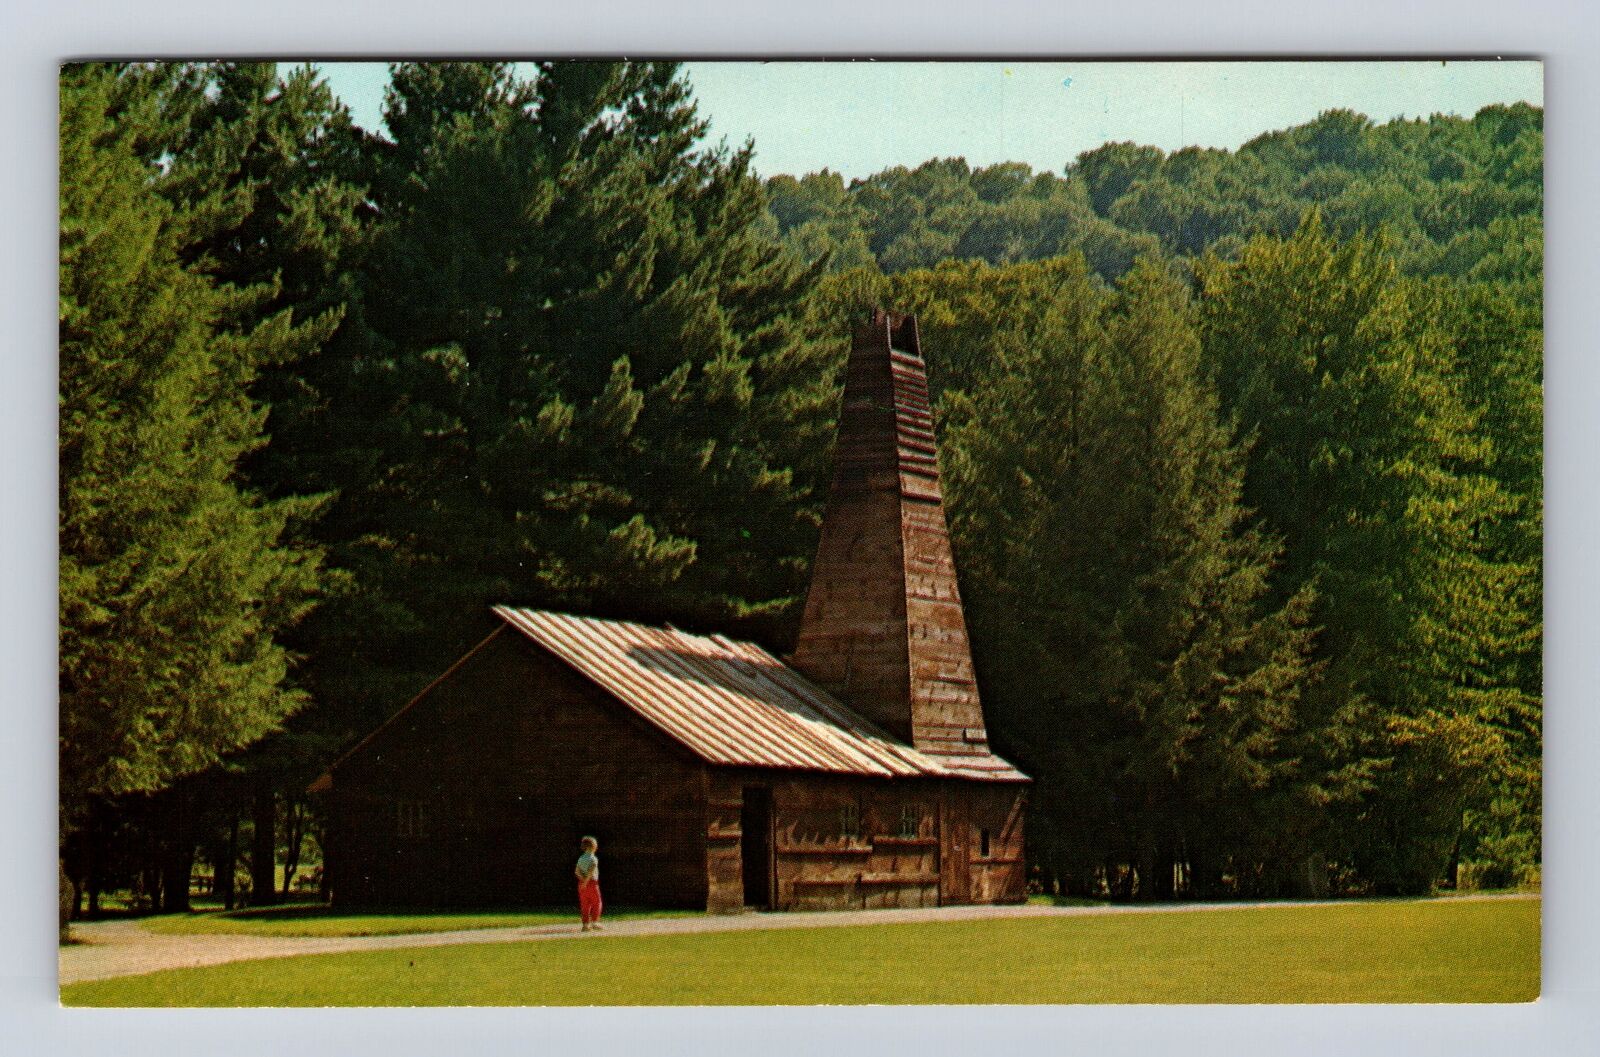 Titusville PA-Pennsylvania, Drake Well, First Oil Well, Vintage Postcard